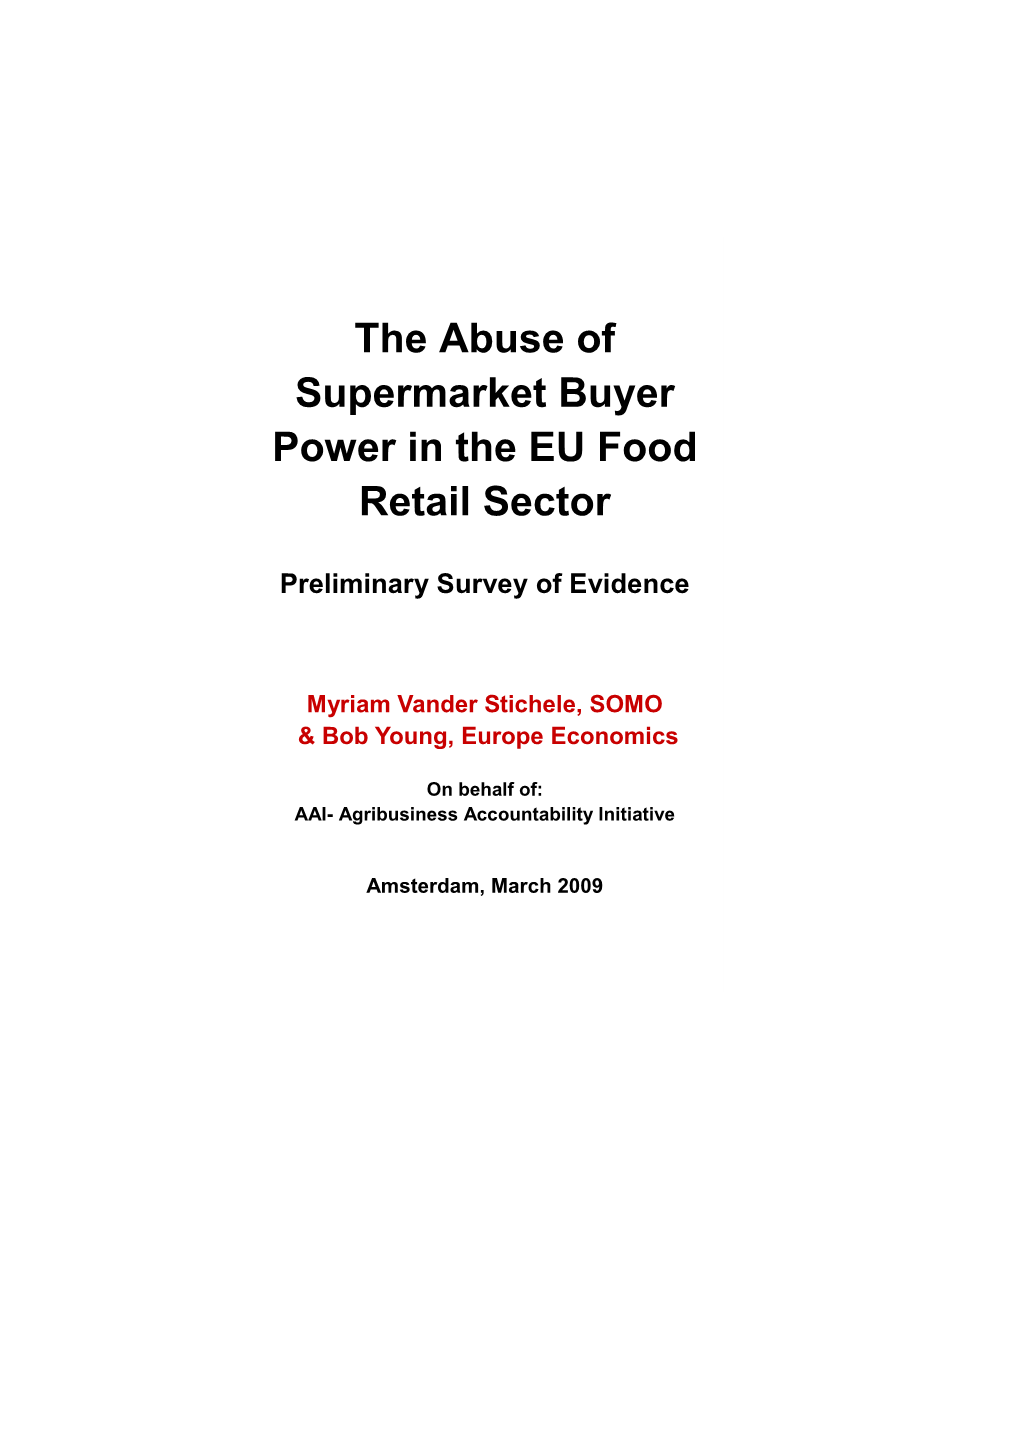 The Abuse of Supermarket Buyers